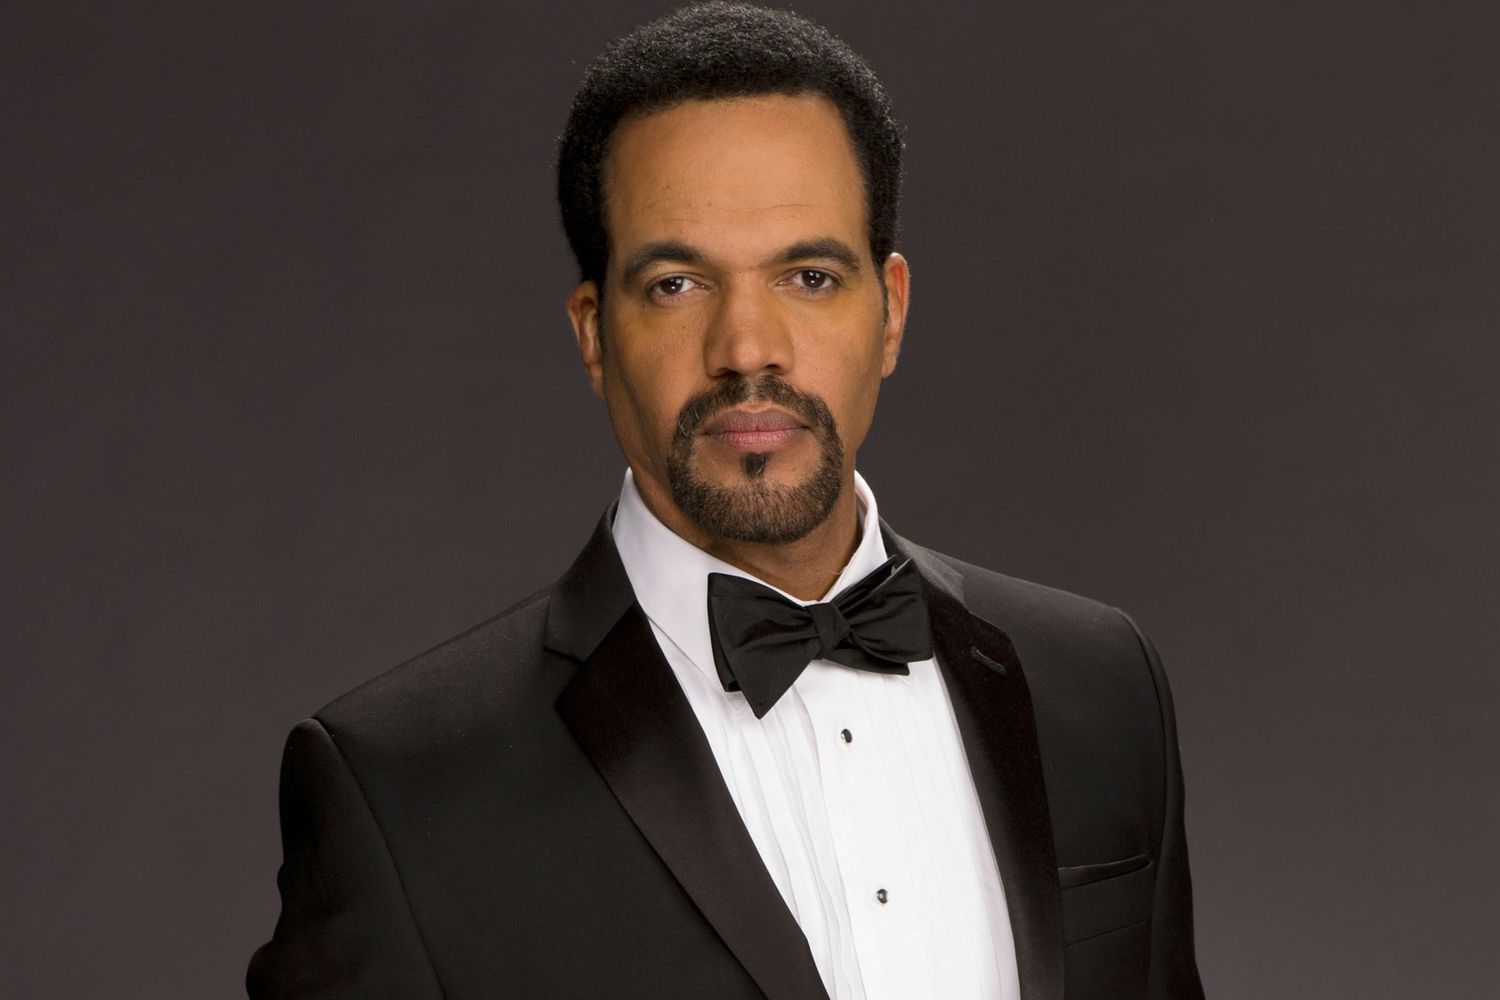 Kristoff St. John who plays as Neil Winters on Y&R